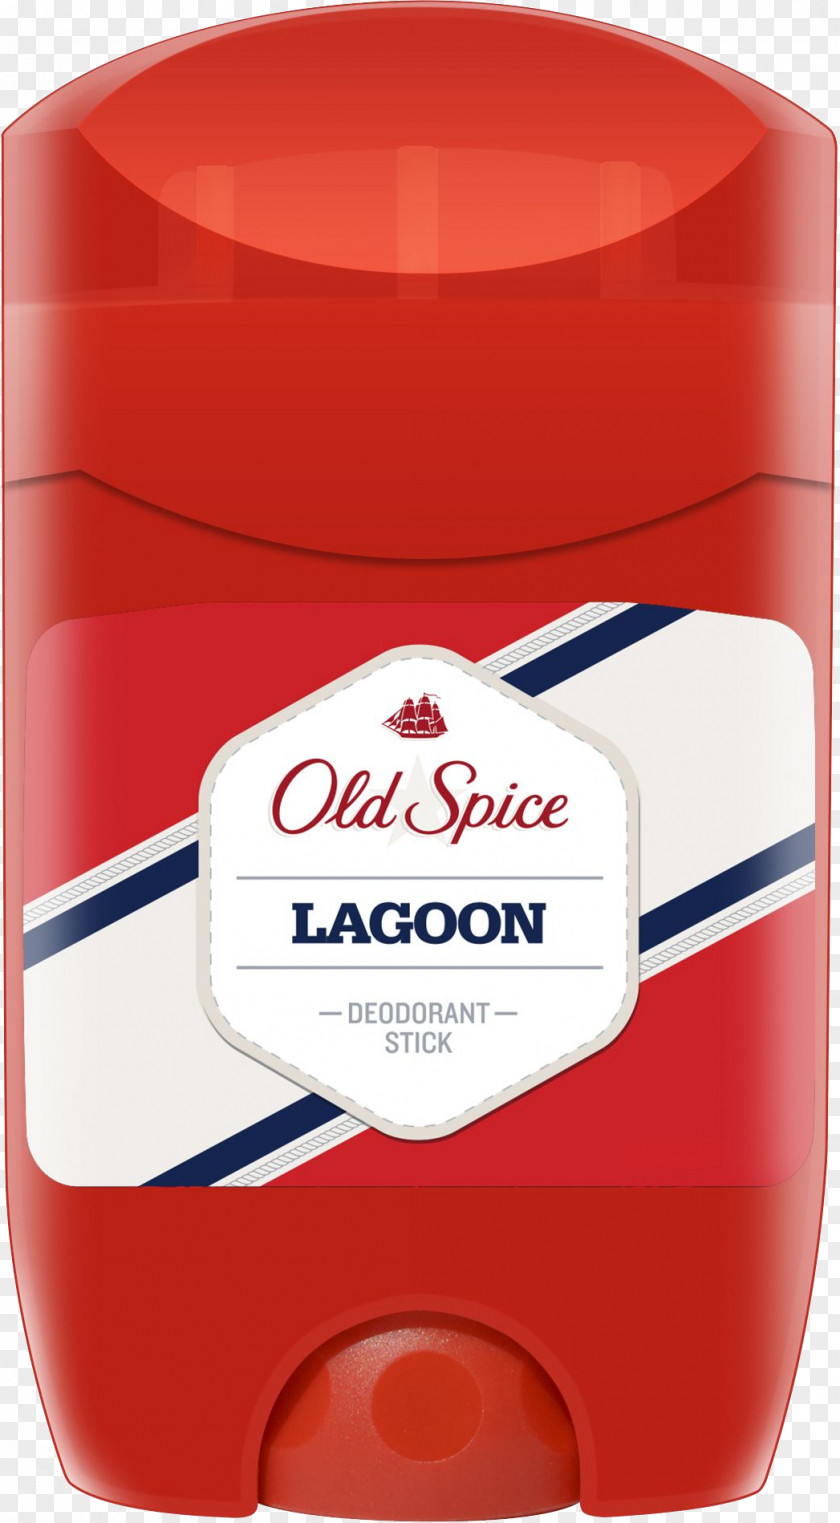 Perfume Old Spice Deodorant Aftershave Cosmetics PNG